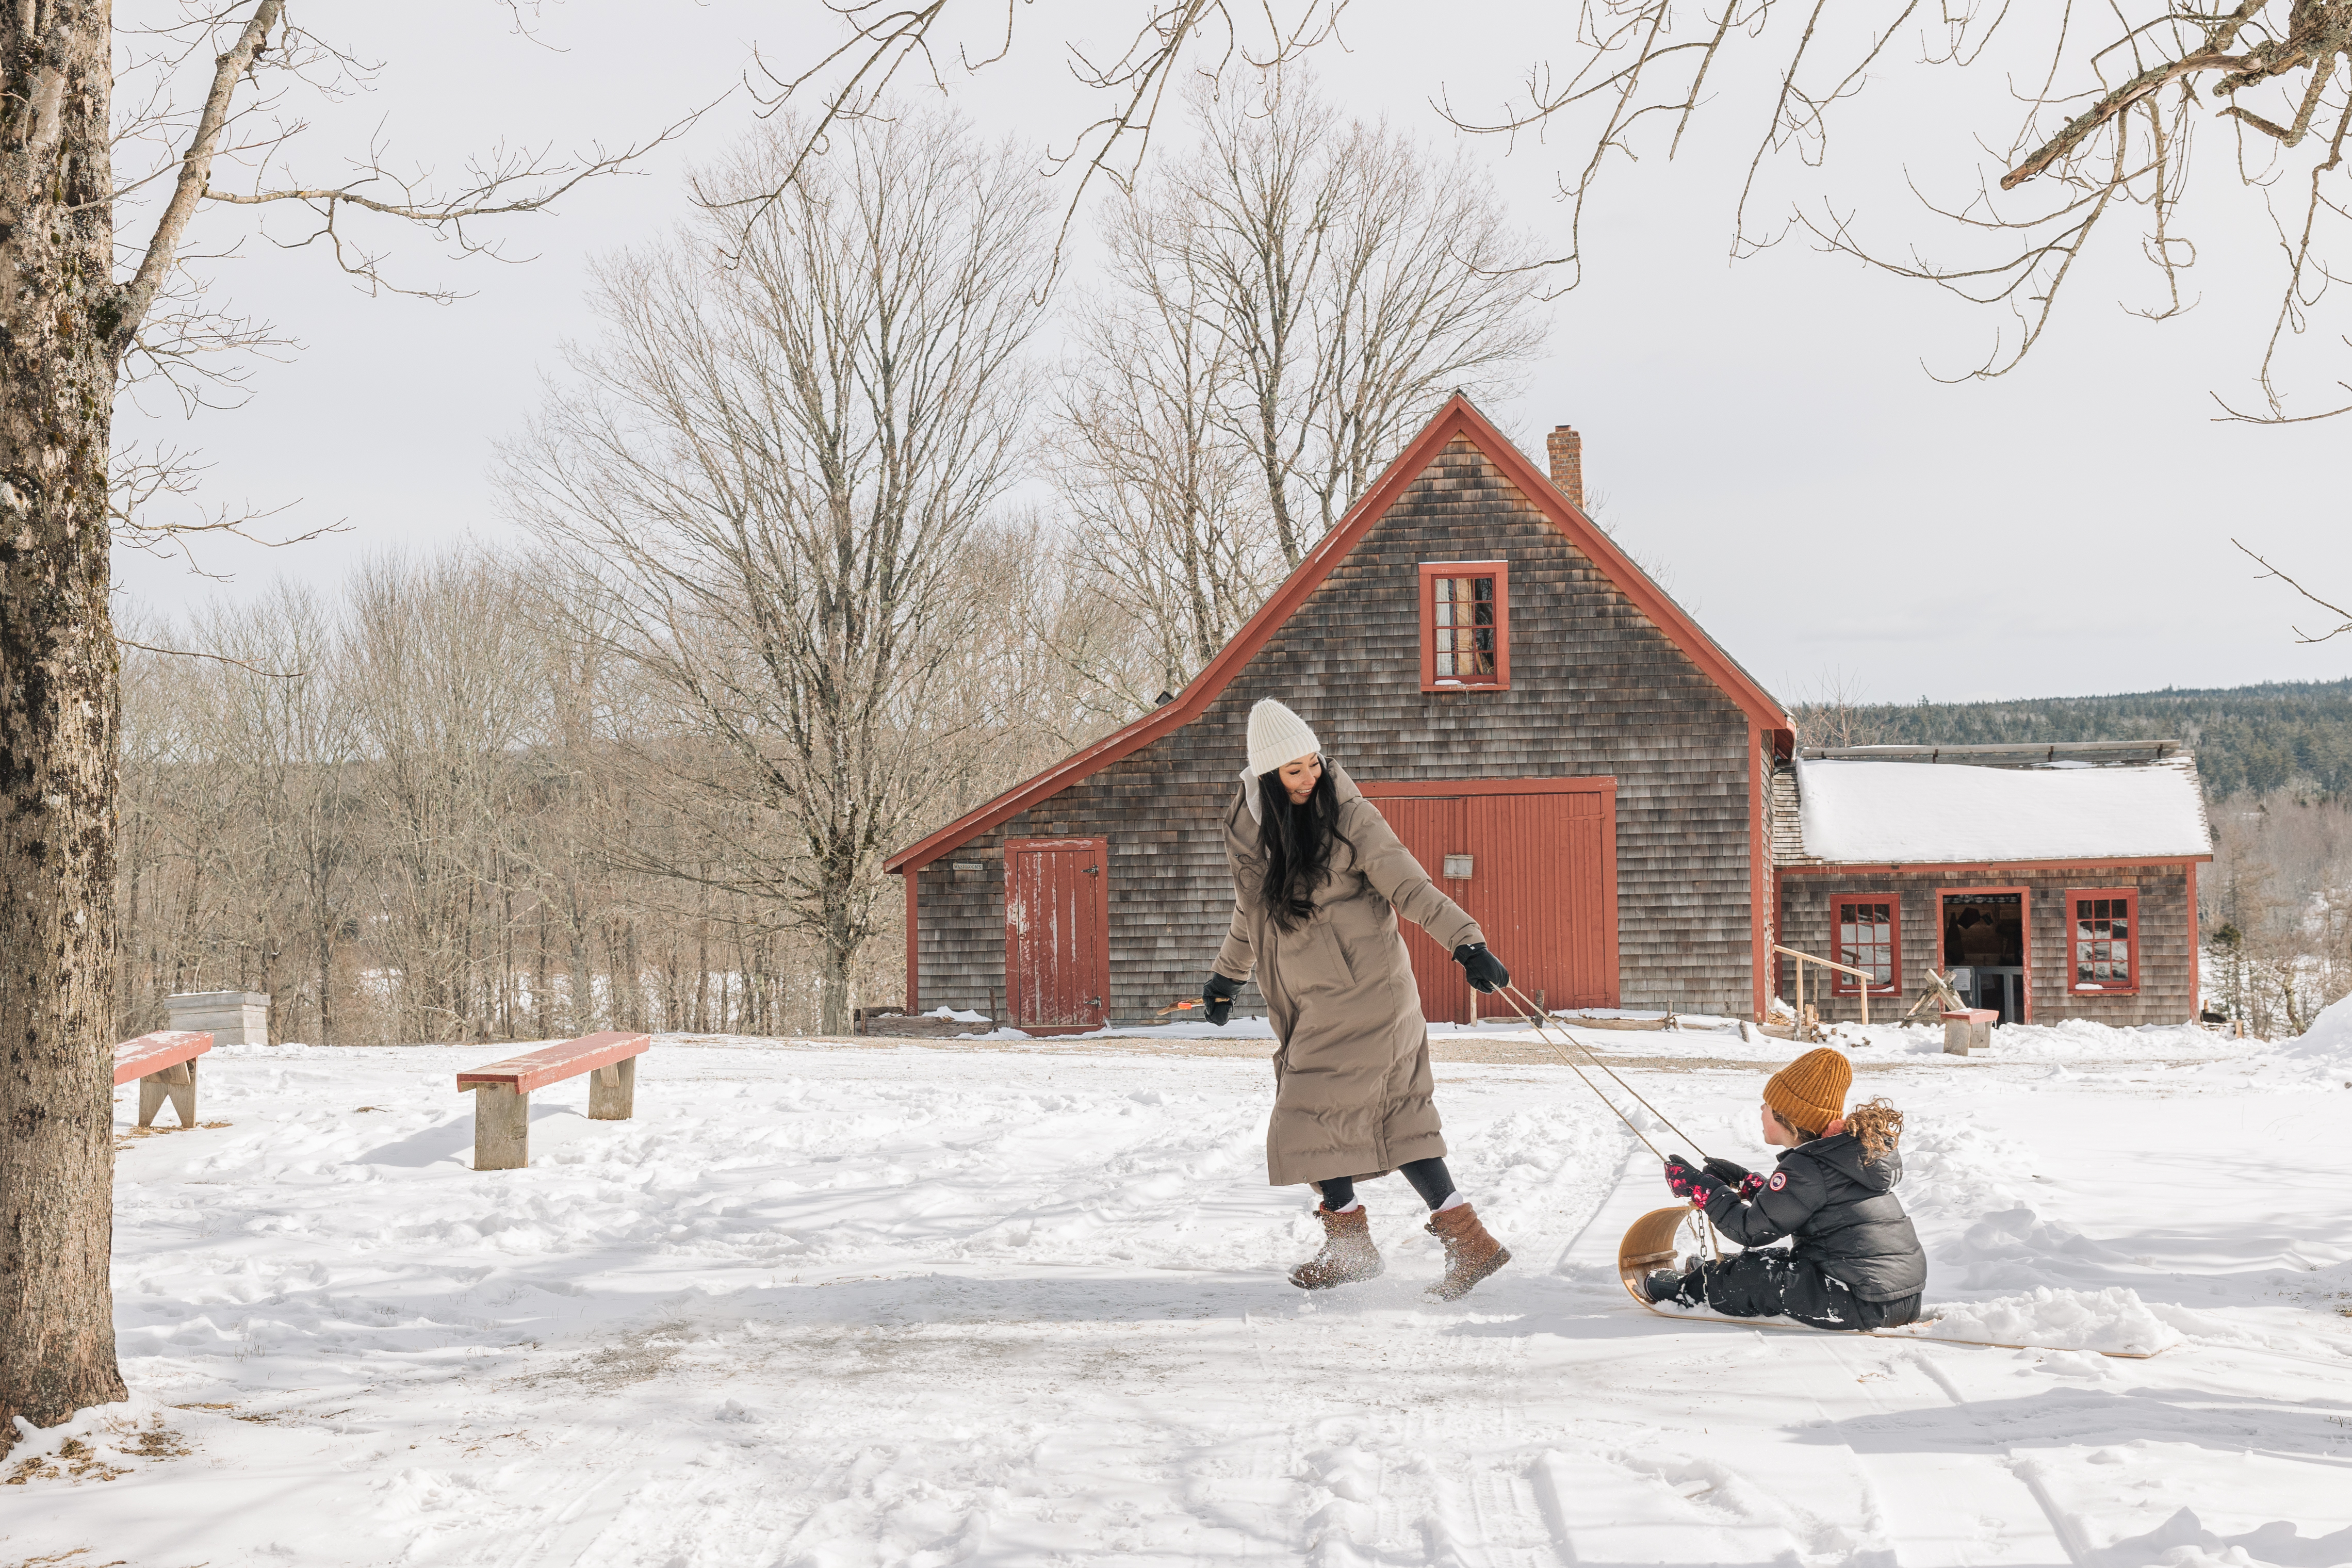 Woman pulling a child on a sled through snow with a brown and red barn in the background.